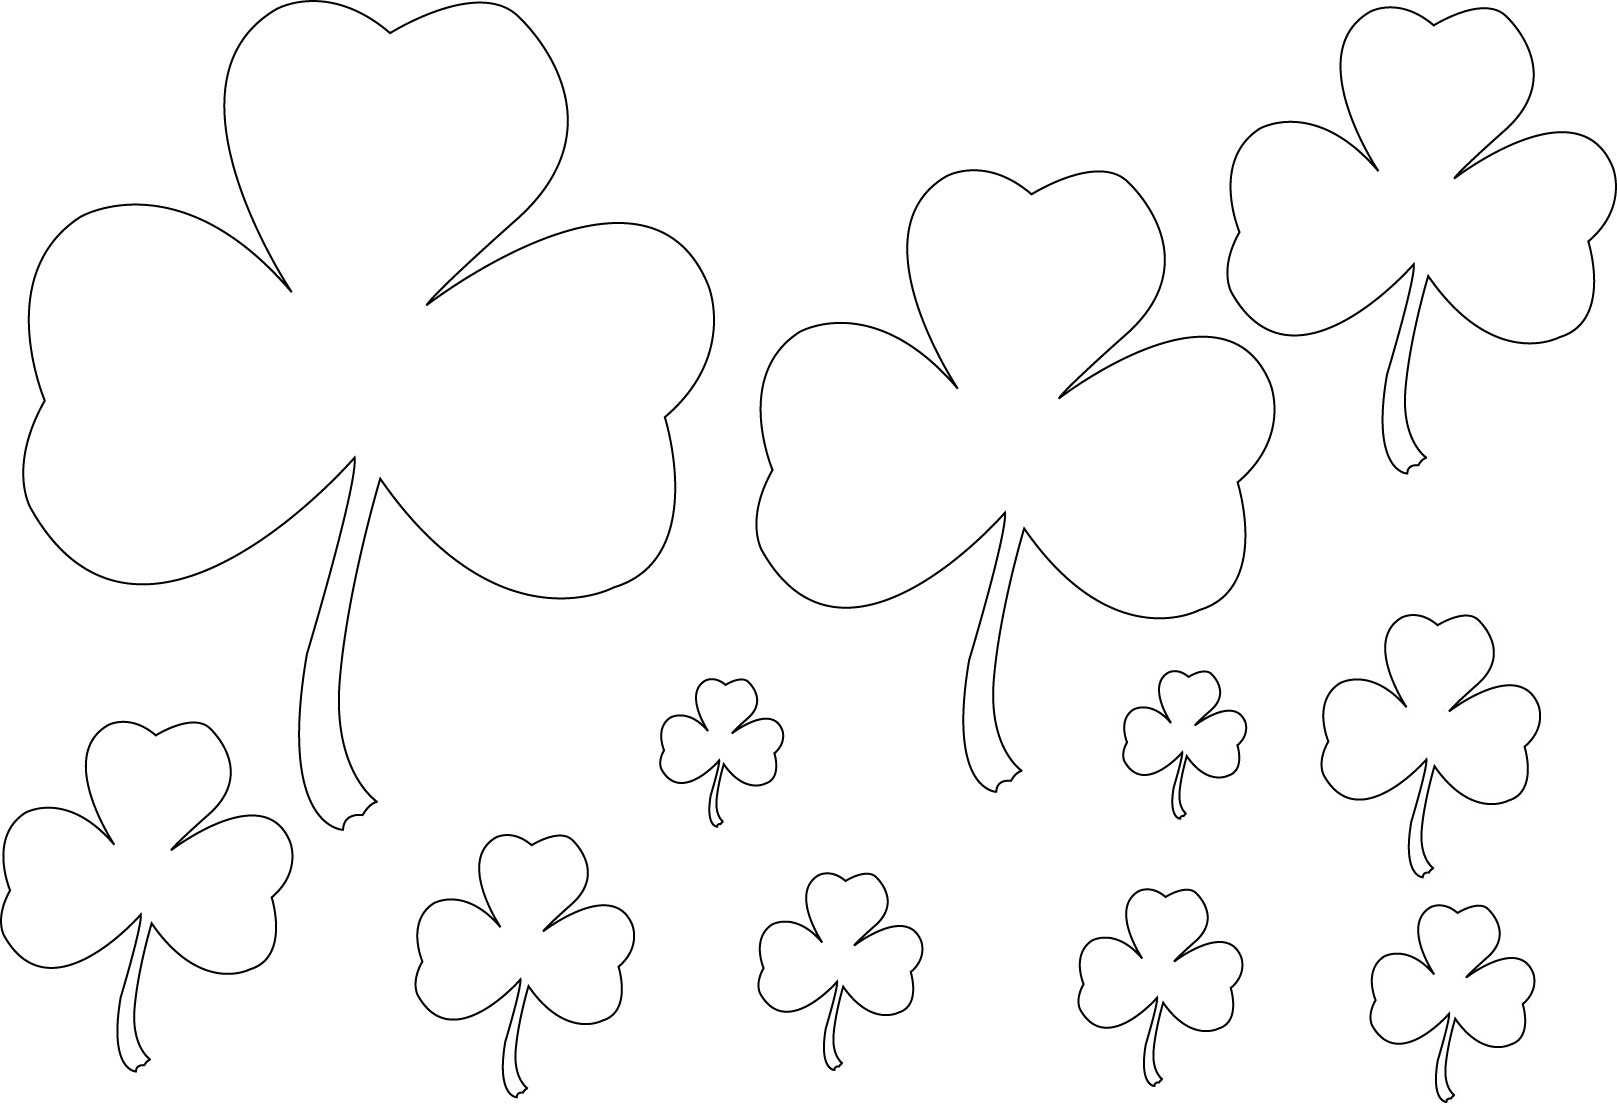 shamrock-coloring-page-free-printable-shamrock-coloring-pages-for-kids